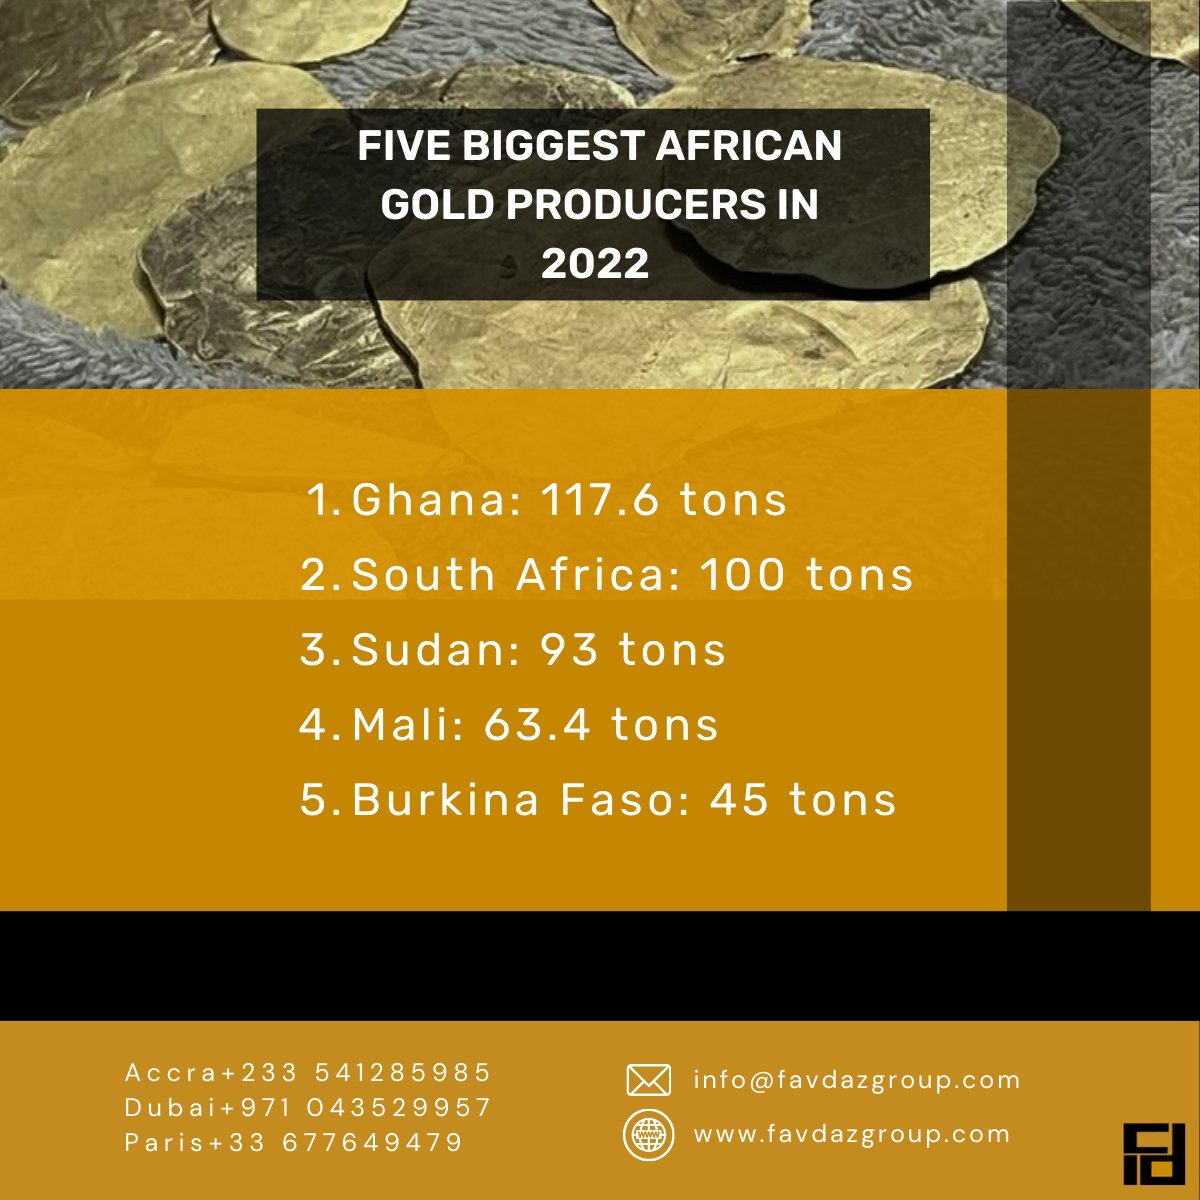 5️⃣largest African gold producers in 2022:
1. 🇬🇭Ghana: 117.6 tons
2. 🇿🇦South Africa: 100 tons
3. 🇸🇩Sudan: 93 tons
4. 🇲🇱Mali: 63.4 tons
5. 🇧🇫Burkina Faso: 45 tons

#favdazgold is a ghanaian gold mining company with large scale license. Contact us oday!t
#goldexporter #goldexport